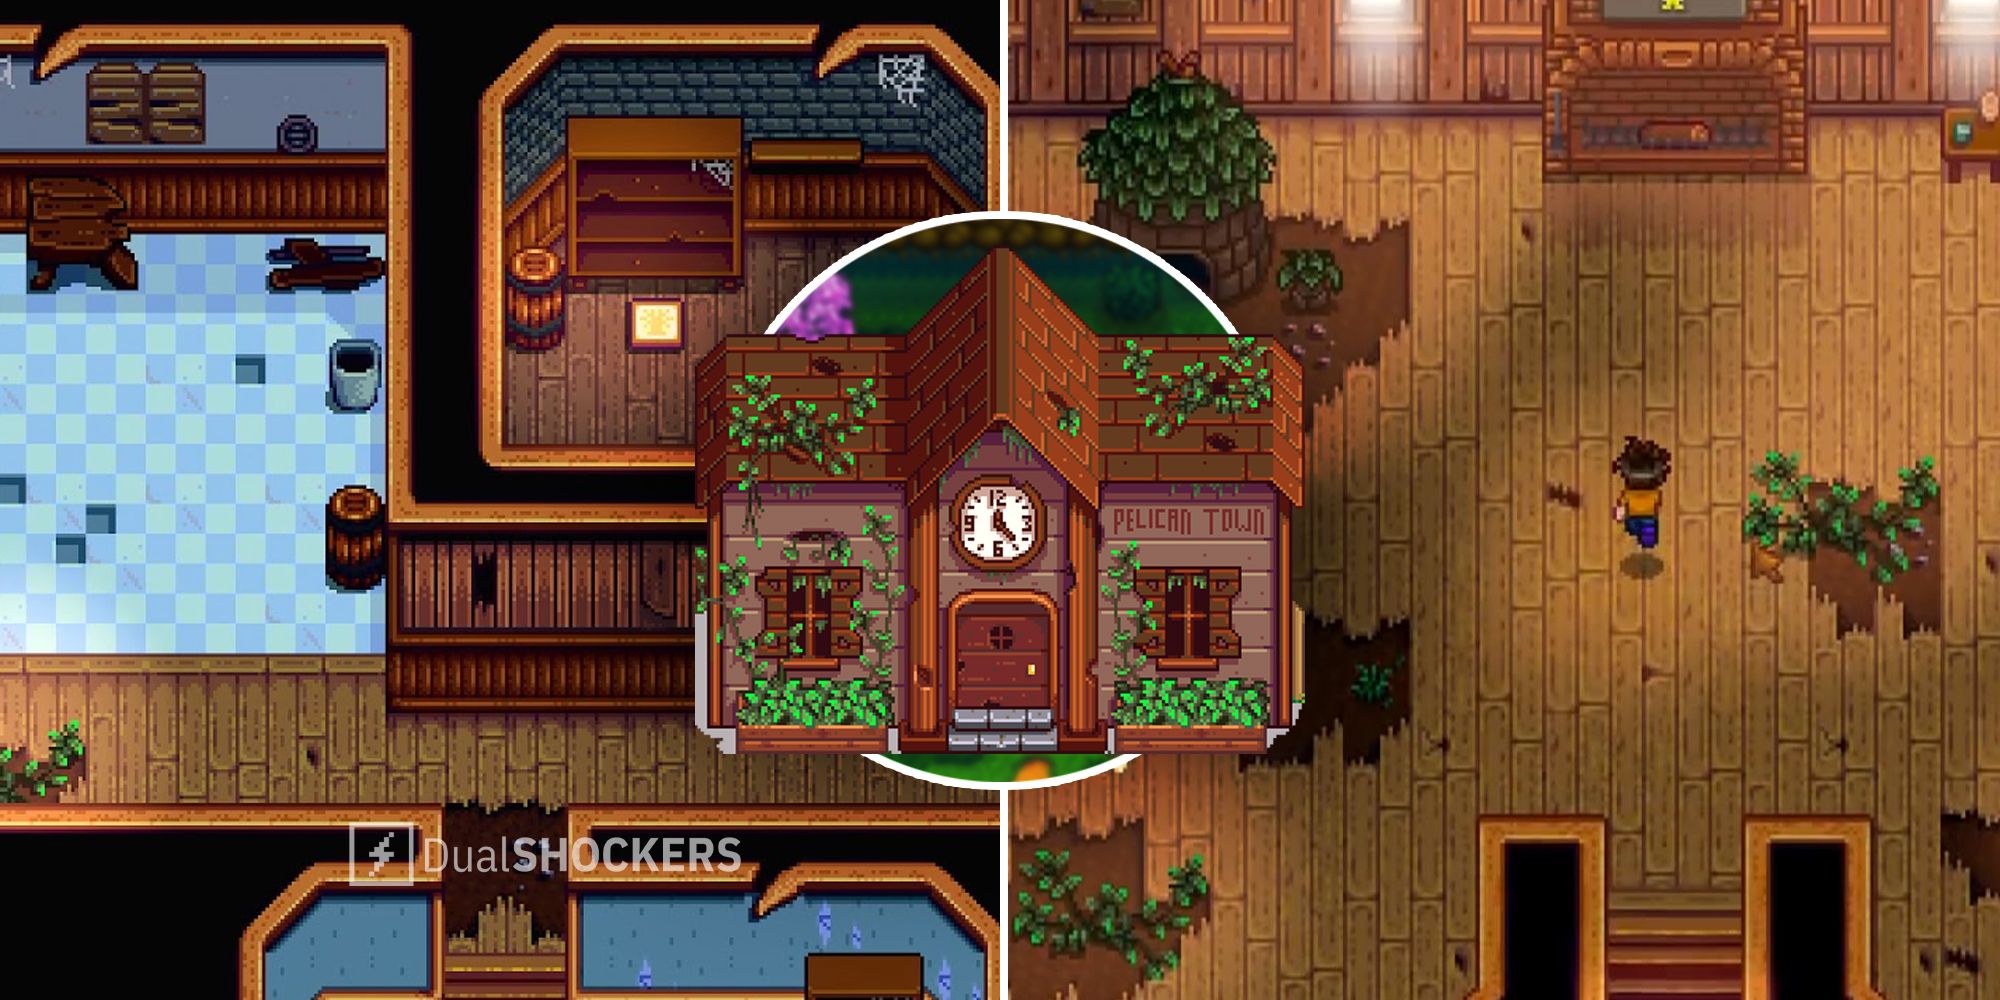 Stardew Valley: Complete Community Center Guide